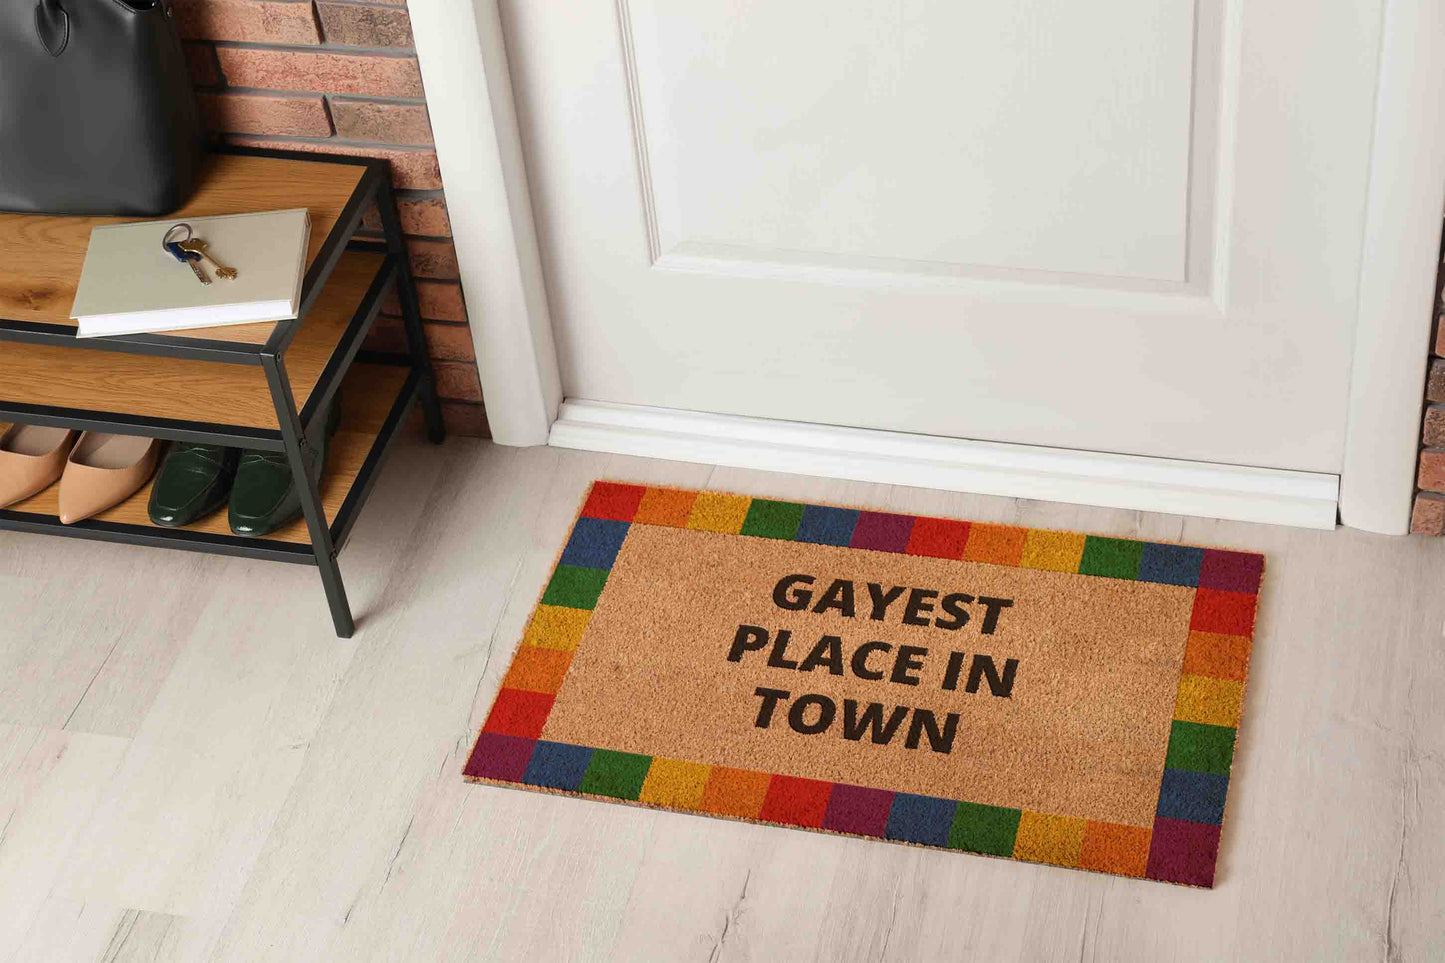 Gayest Place in Town Doormat